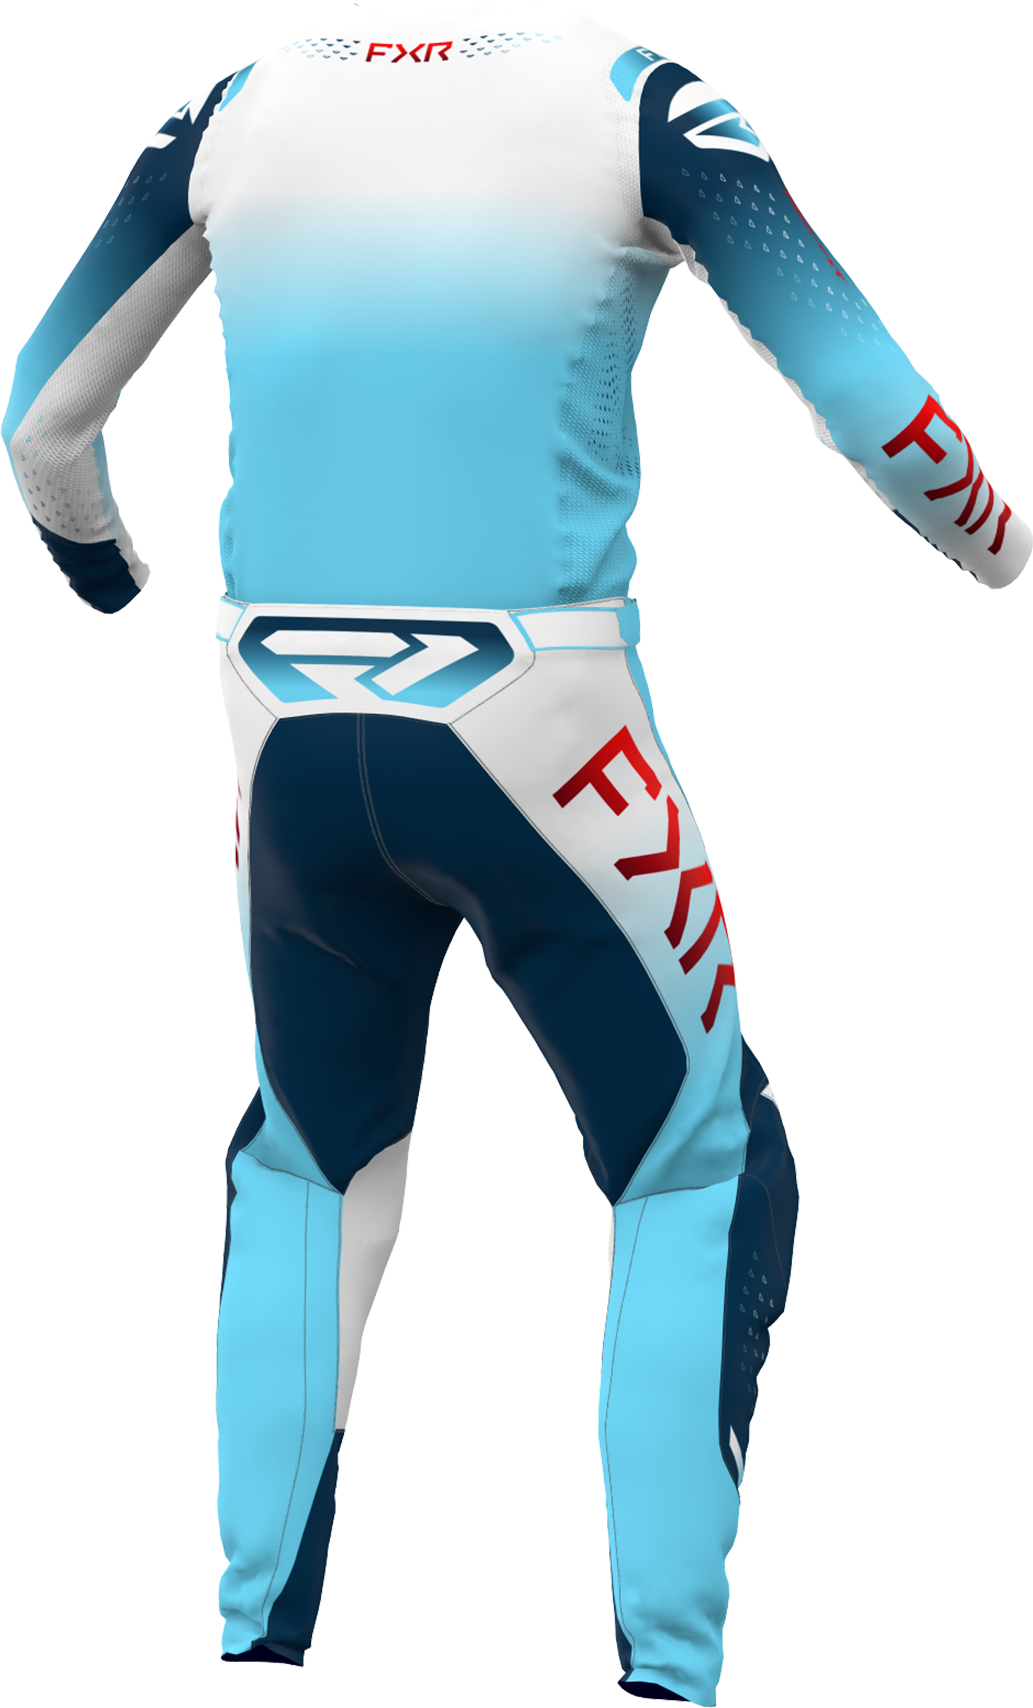 A 3D image of FXR's Helium MX Jersey and Pant in Glacier colorway